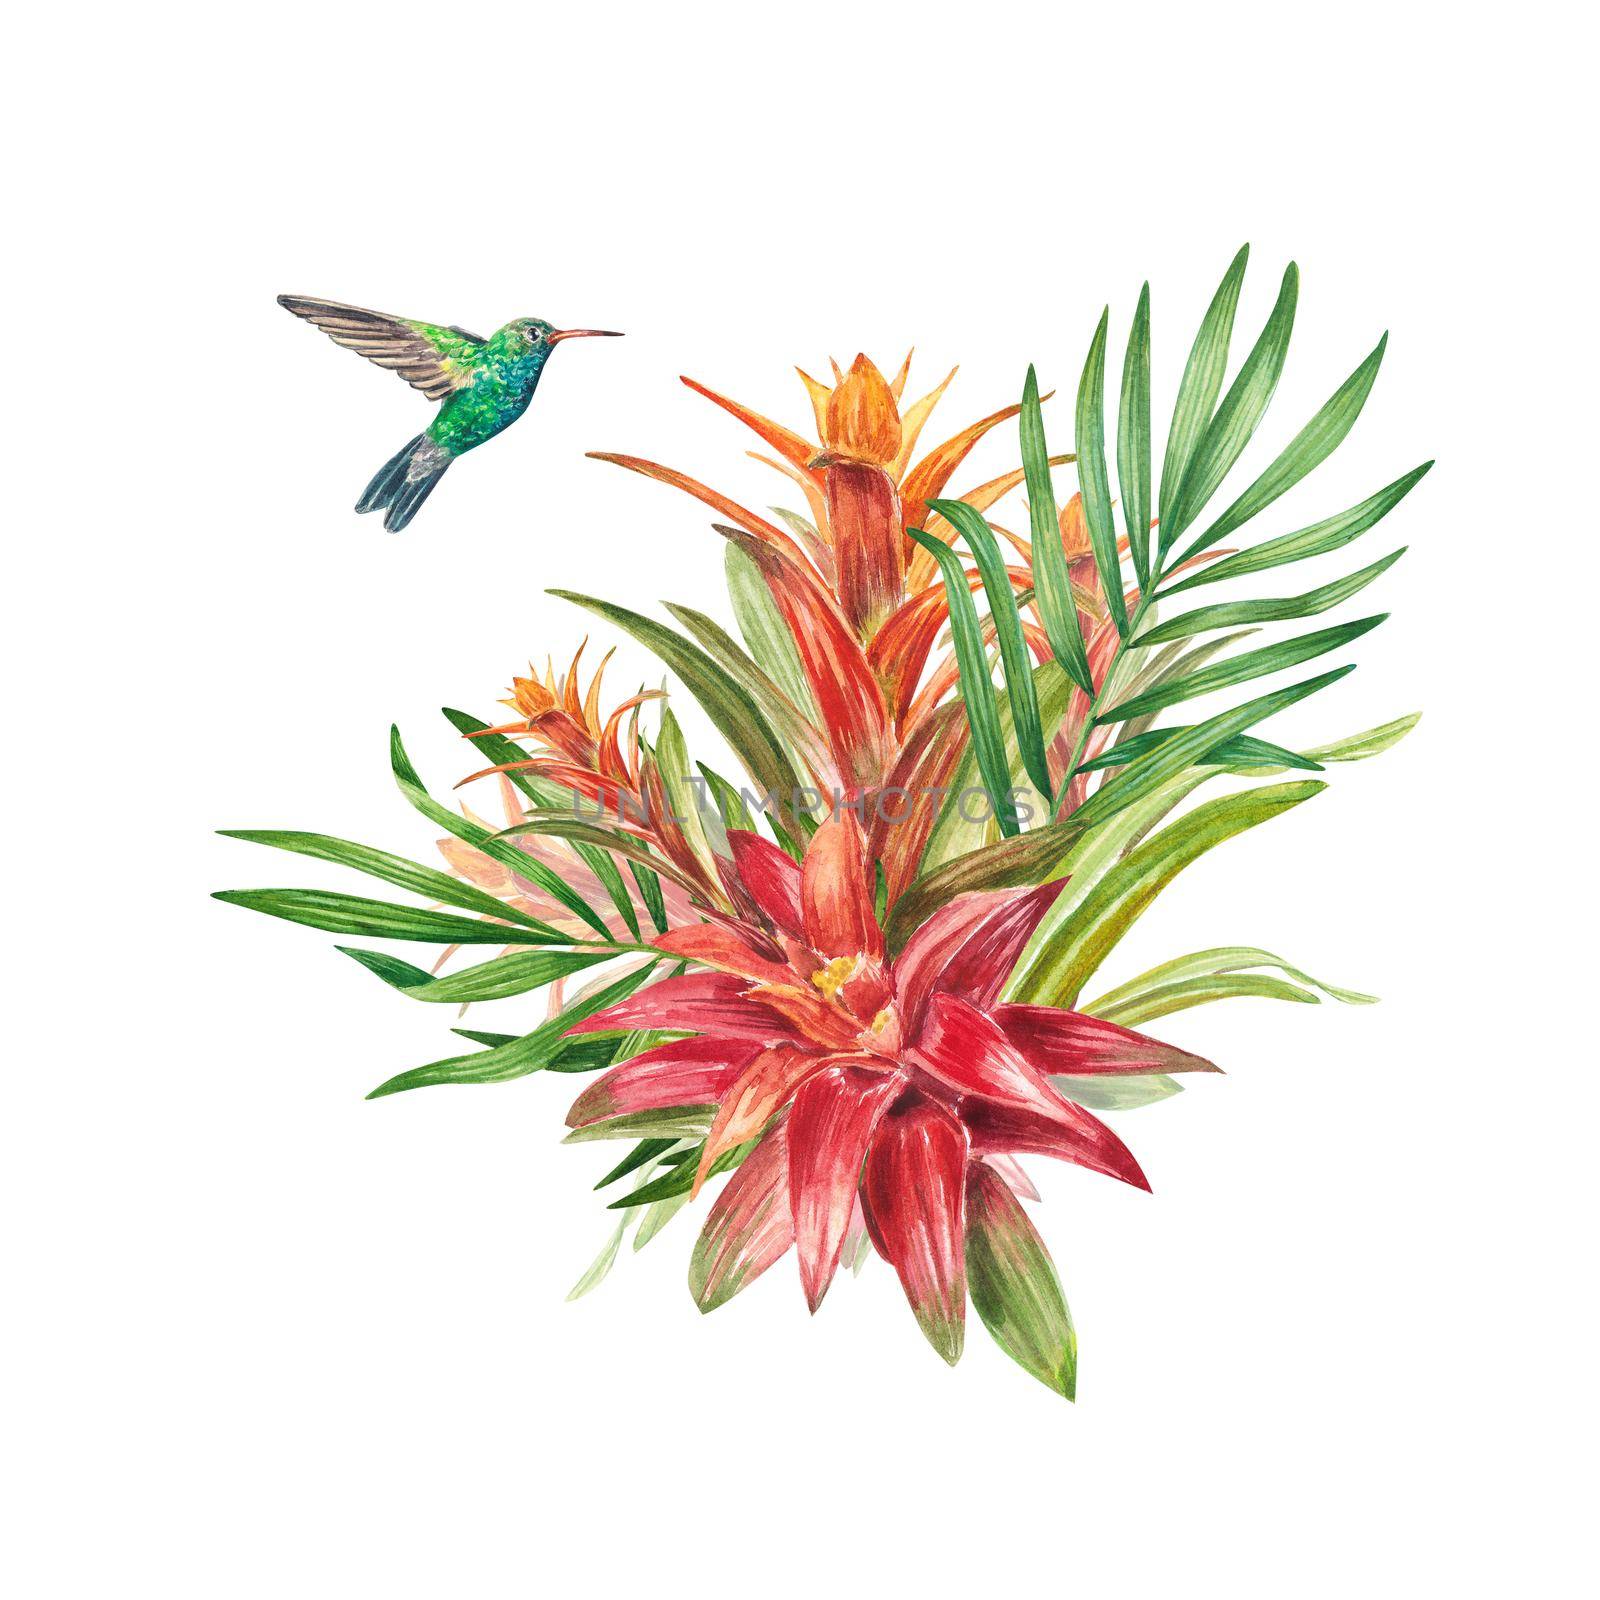 A tropical bromeliad plant with red leaves and a hummingbird, painted in watercolor. The illustration is highlighted on a white background. Spring or summer flower for wedding invitations, postcards by NastyaChe